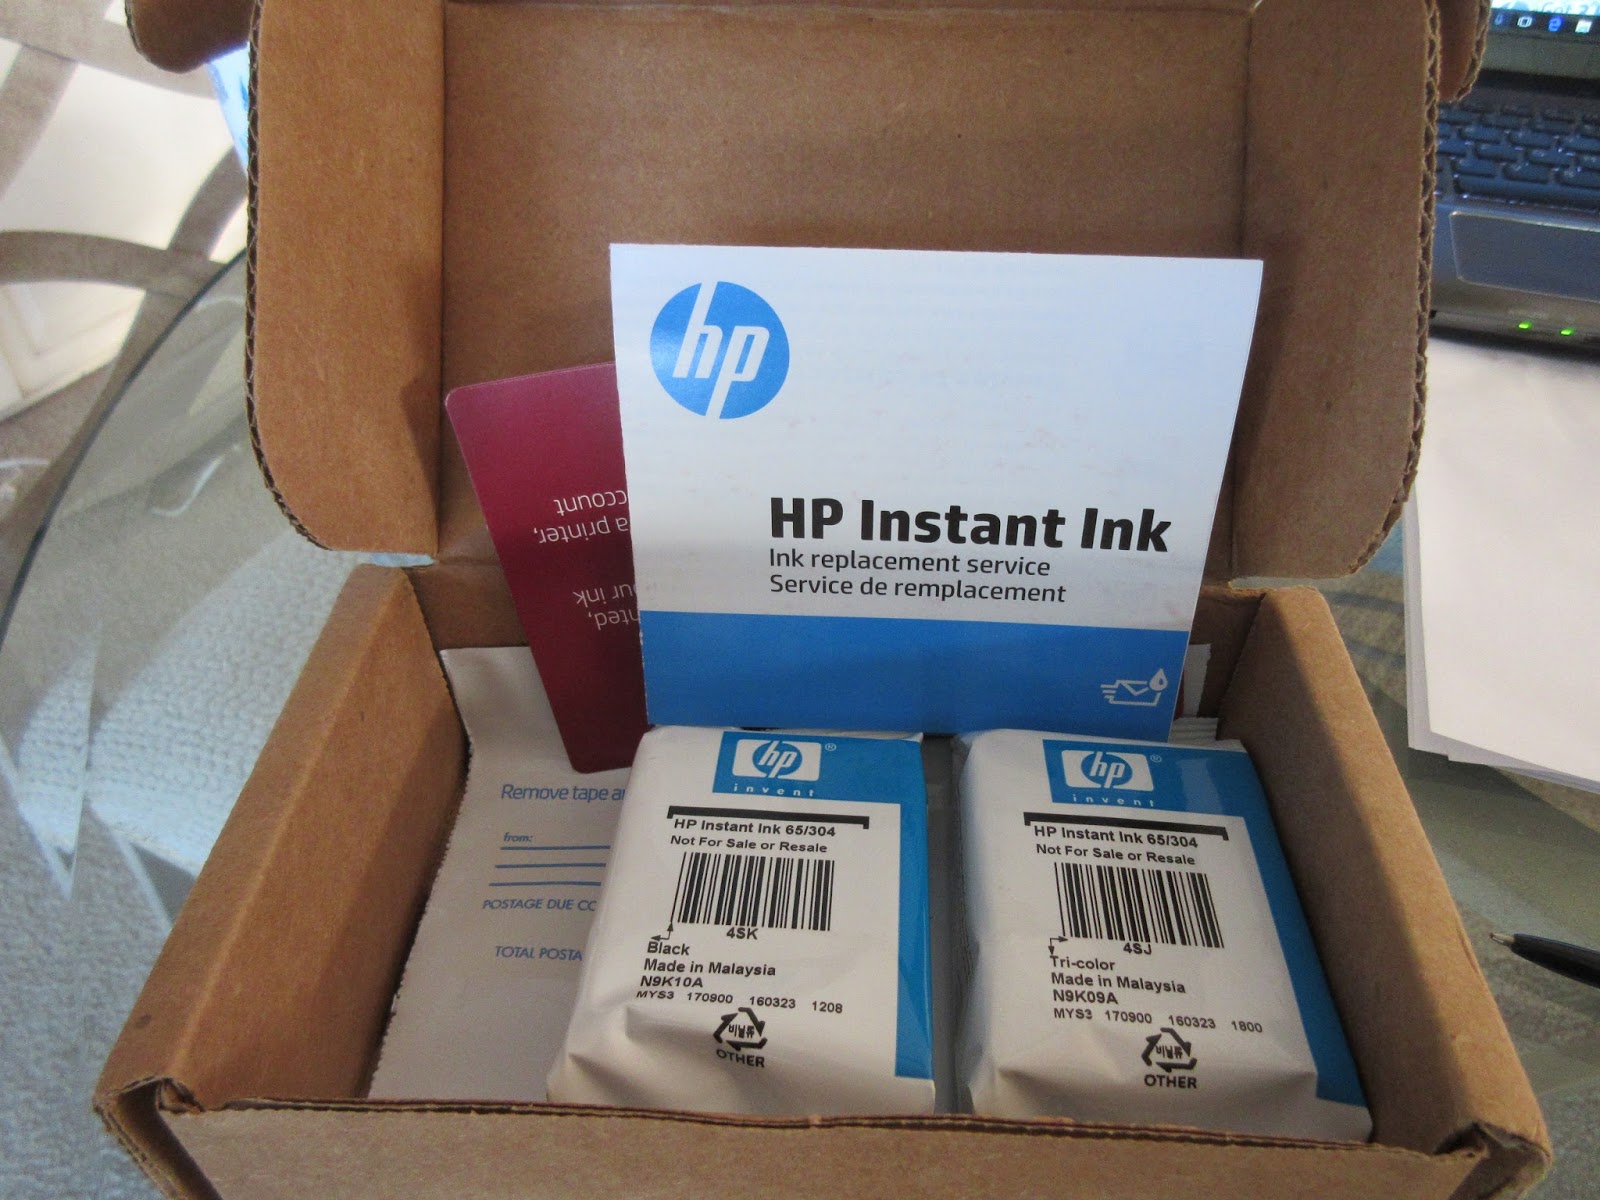 CouponAnna coupons,coupon codes,printable coupons HP instant ink Get